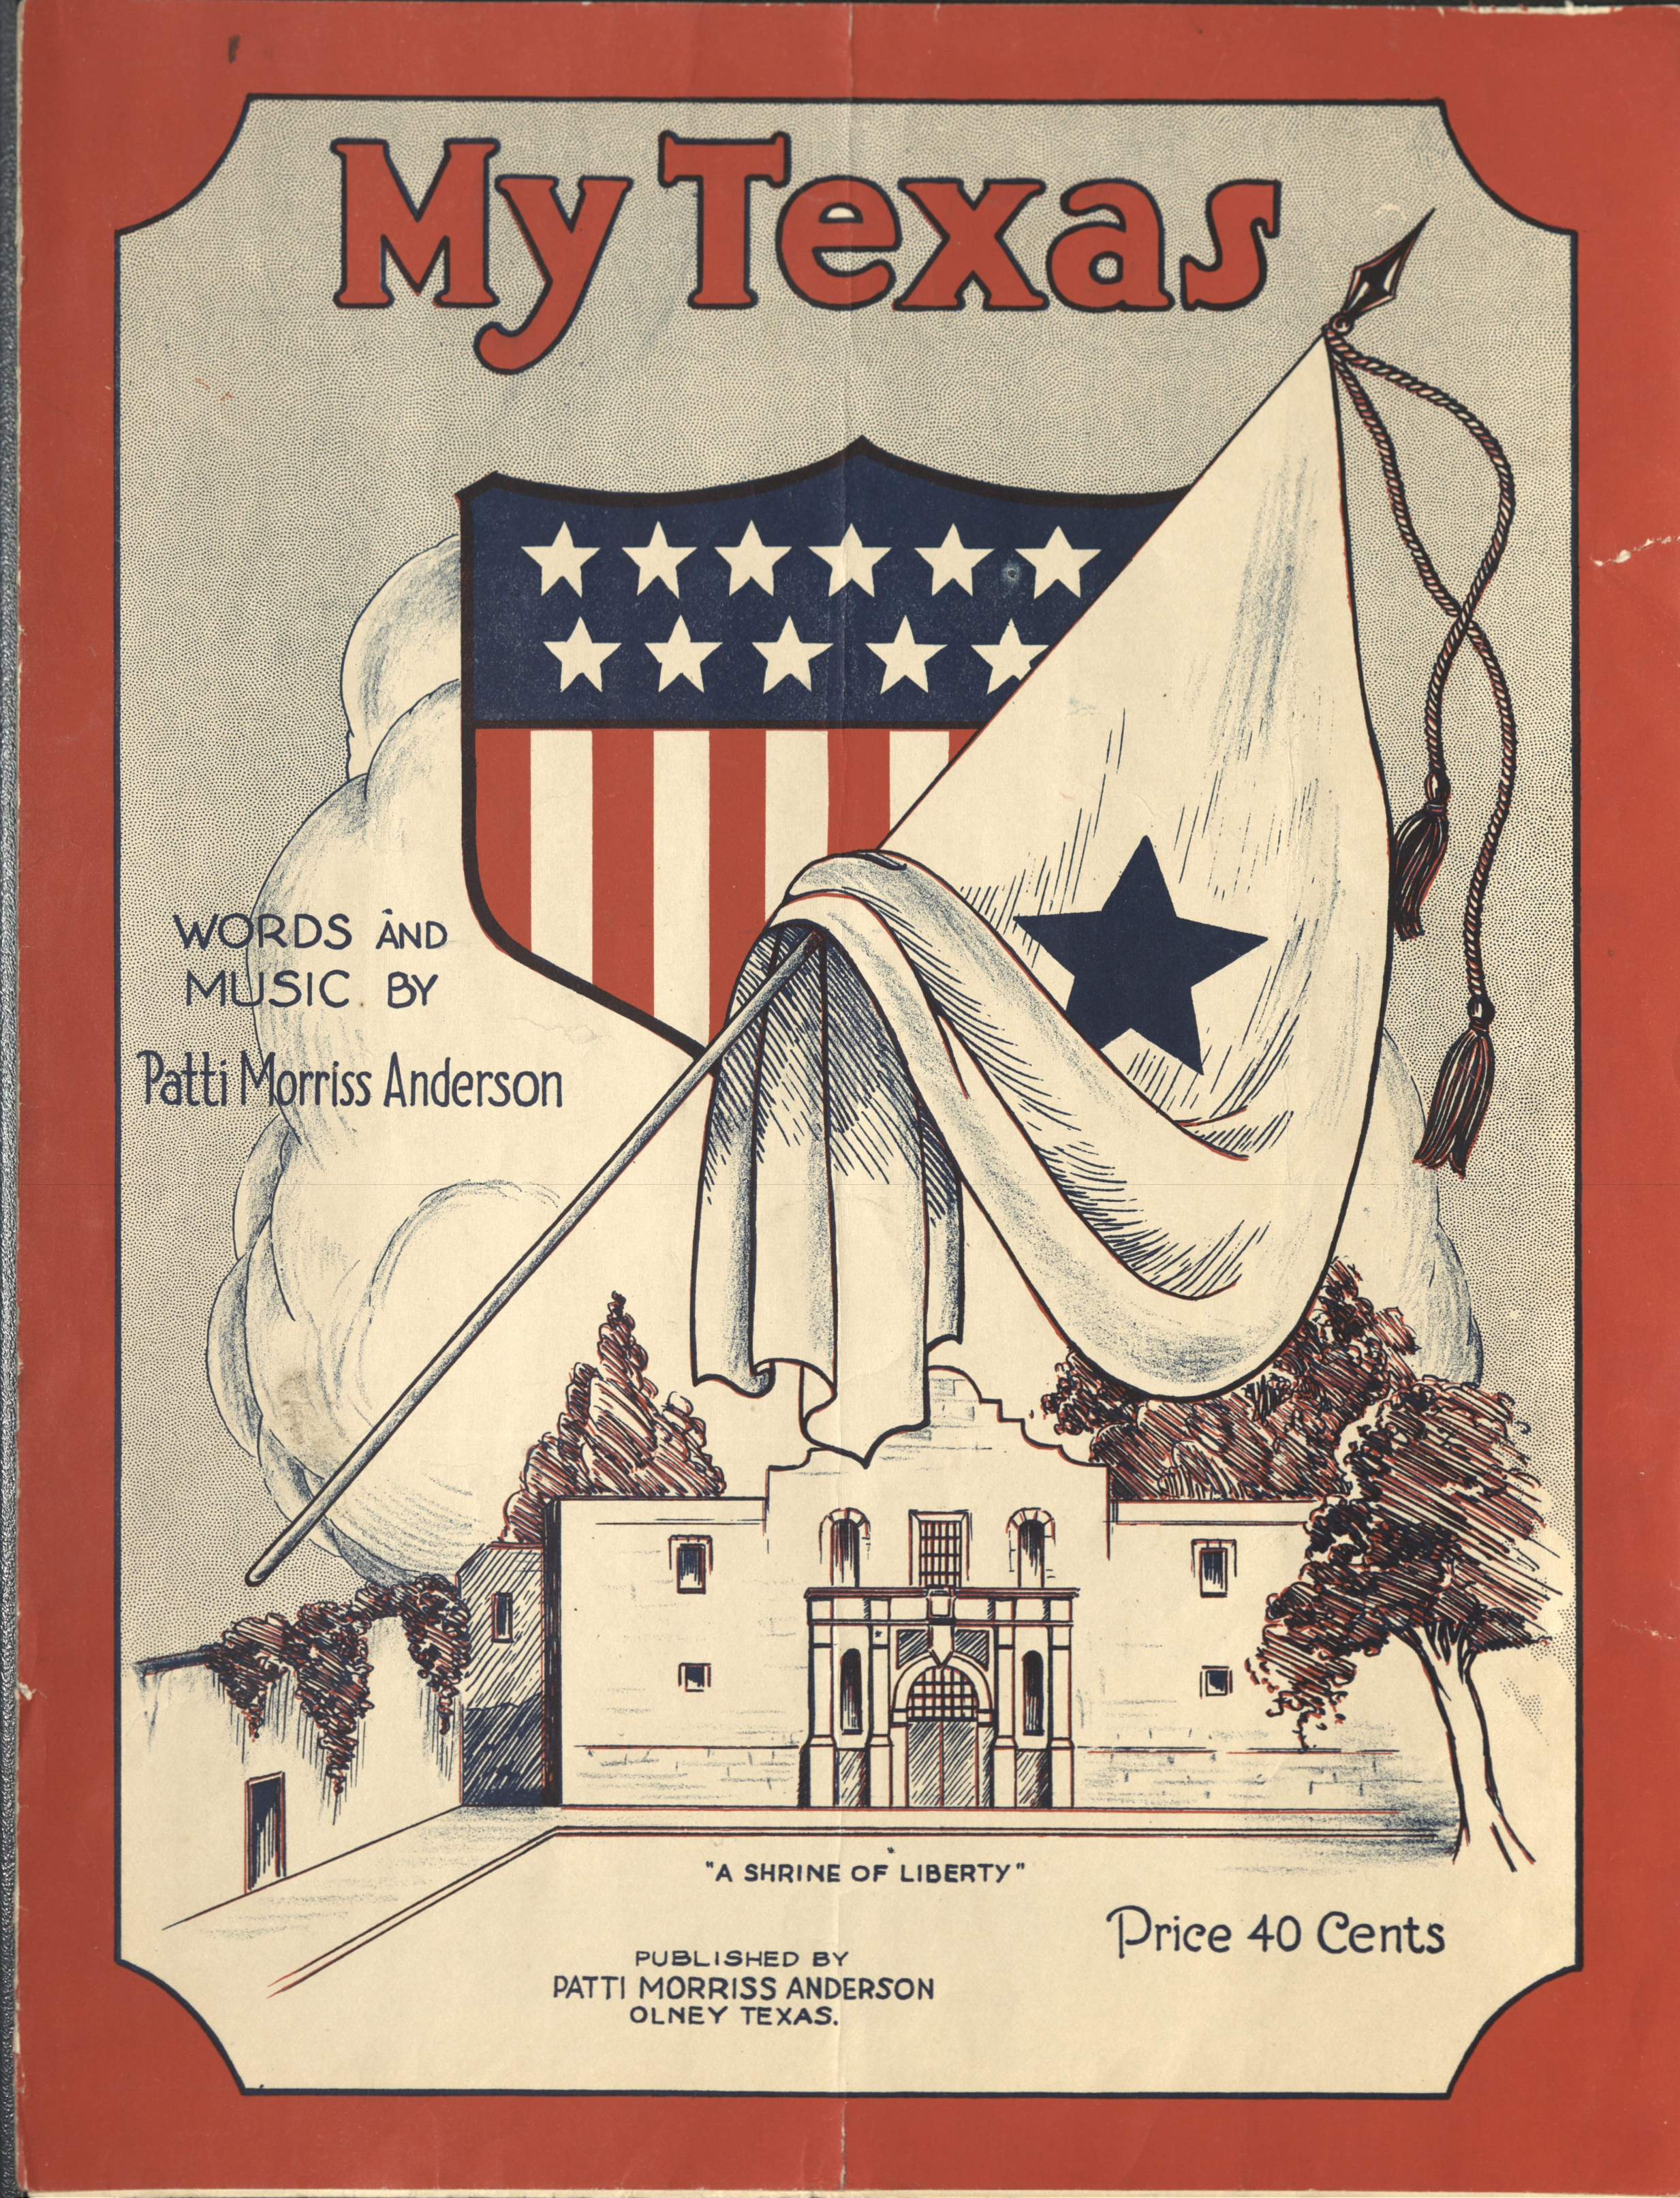 Cover of "My Texas" showing the Alamo and Lone Star flag.